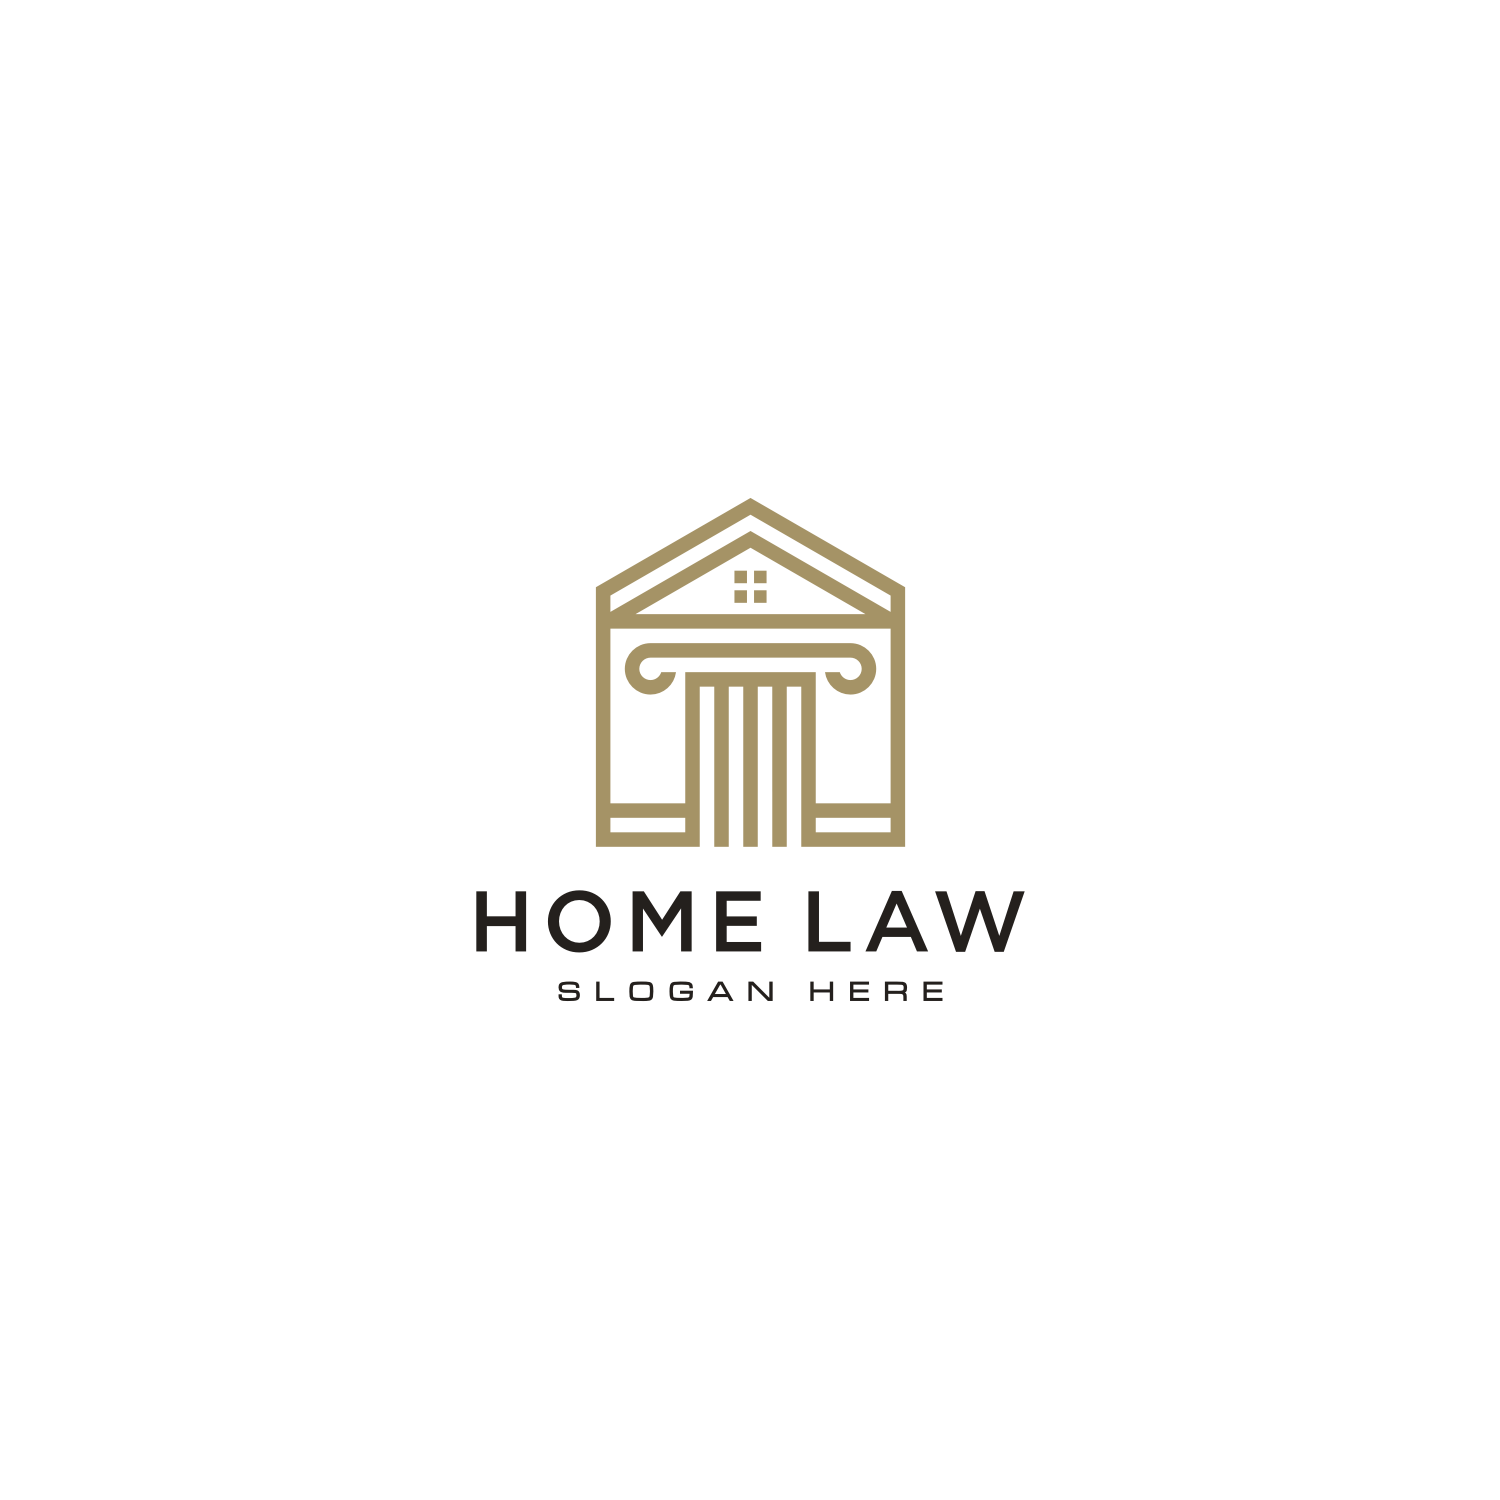 Home Law Firm Logo Vector Design cover iamge.